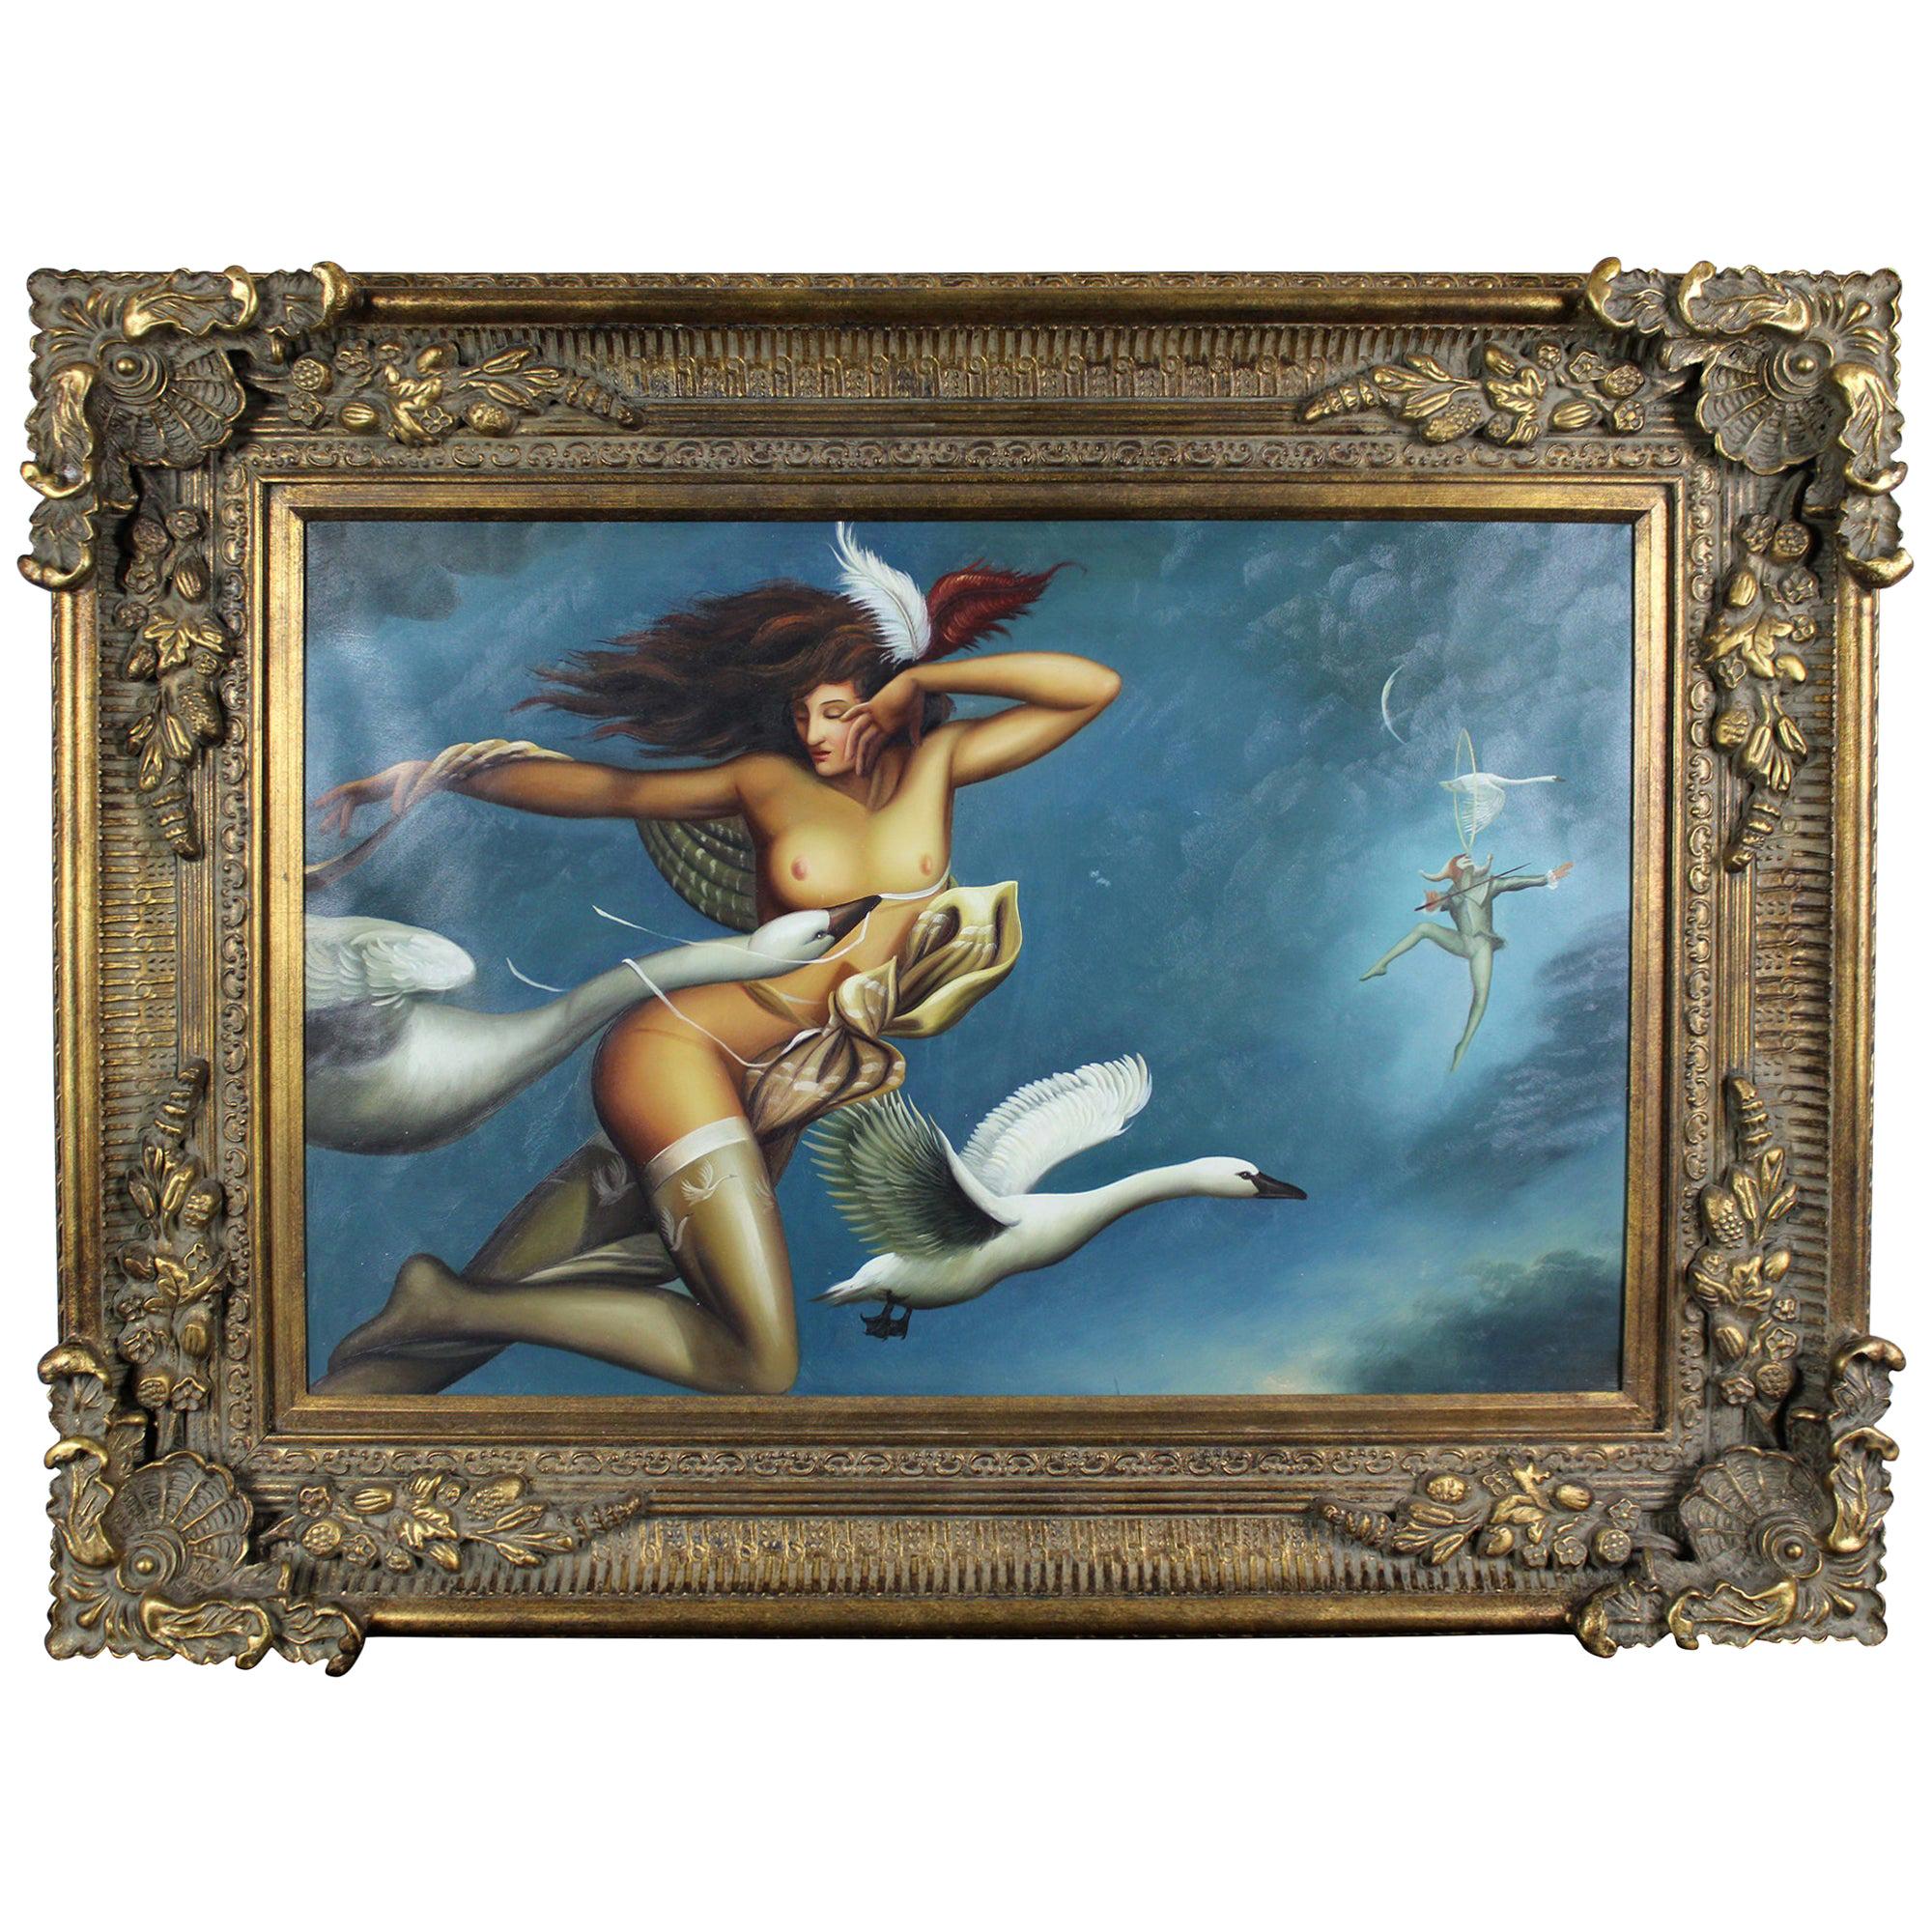 Michael Parkes "Night Flight" Limited Edition Giclee on Canvas Nude Swans